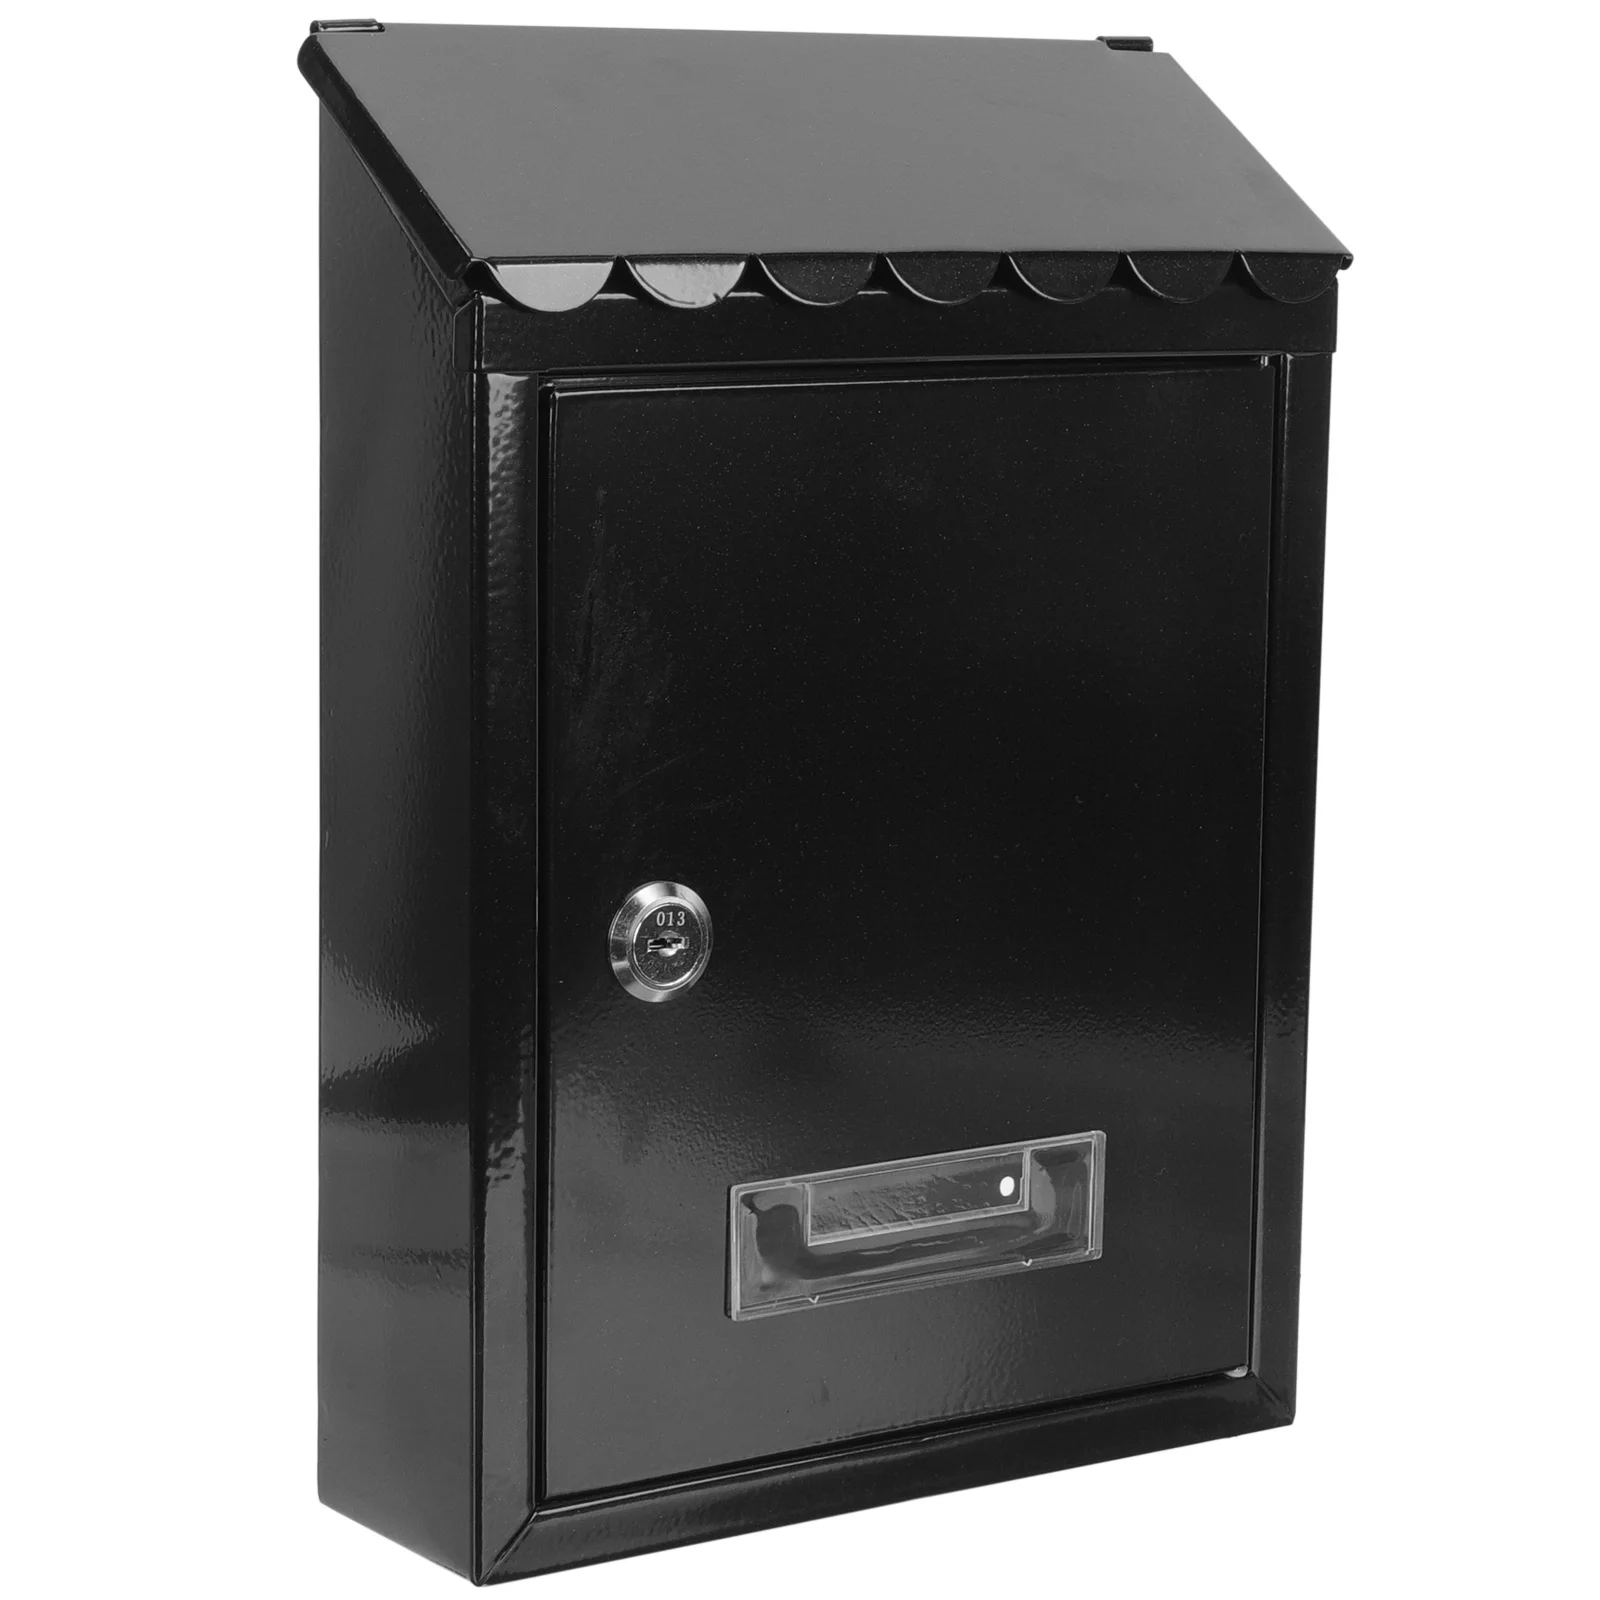 

Box Mailbox Wall Drop Suggestion Donation Decor Letter Ballot Holder Raffle Outdoor Storage Door Secure Postbox Lockable